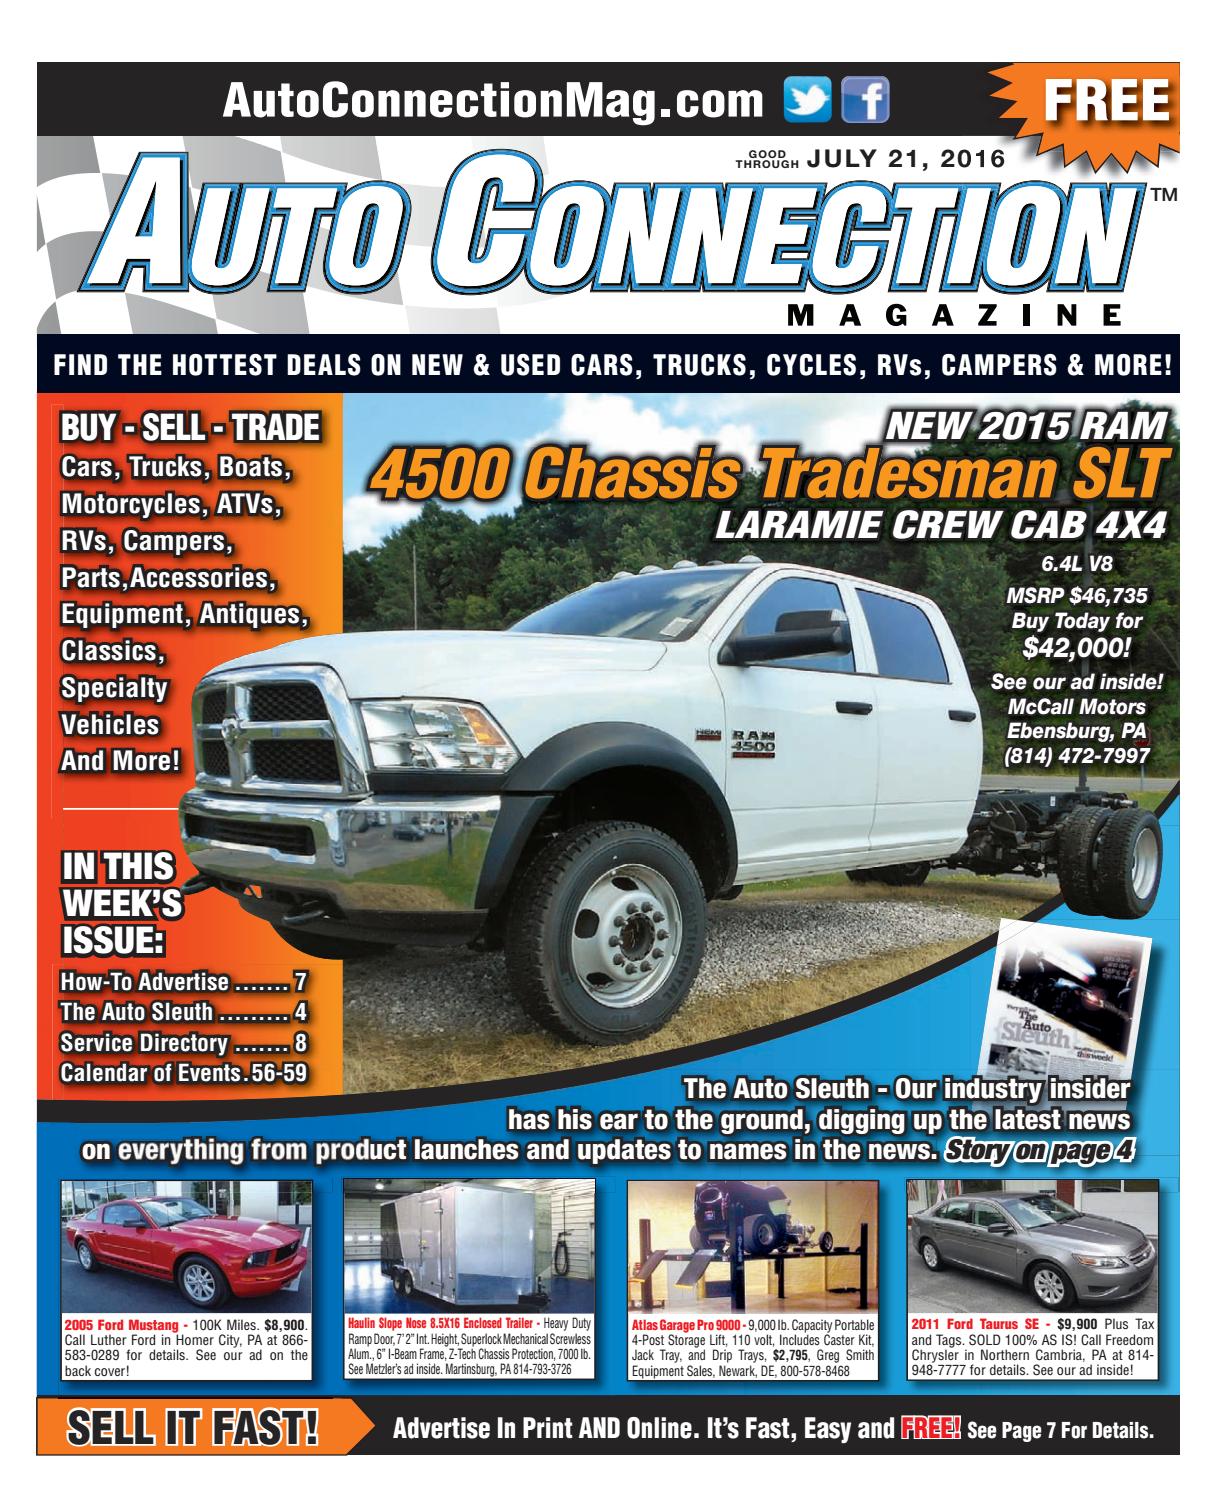 Outdoor Fireplace Kits Under $1000 Lovely 07 21 16 Auto Connection Magazine by Auto Connection